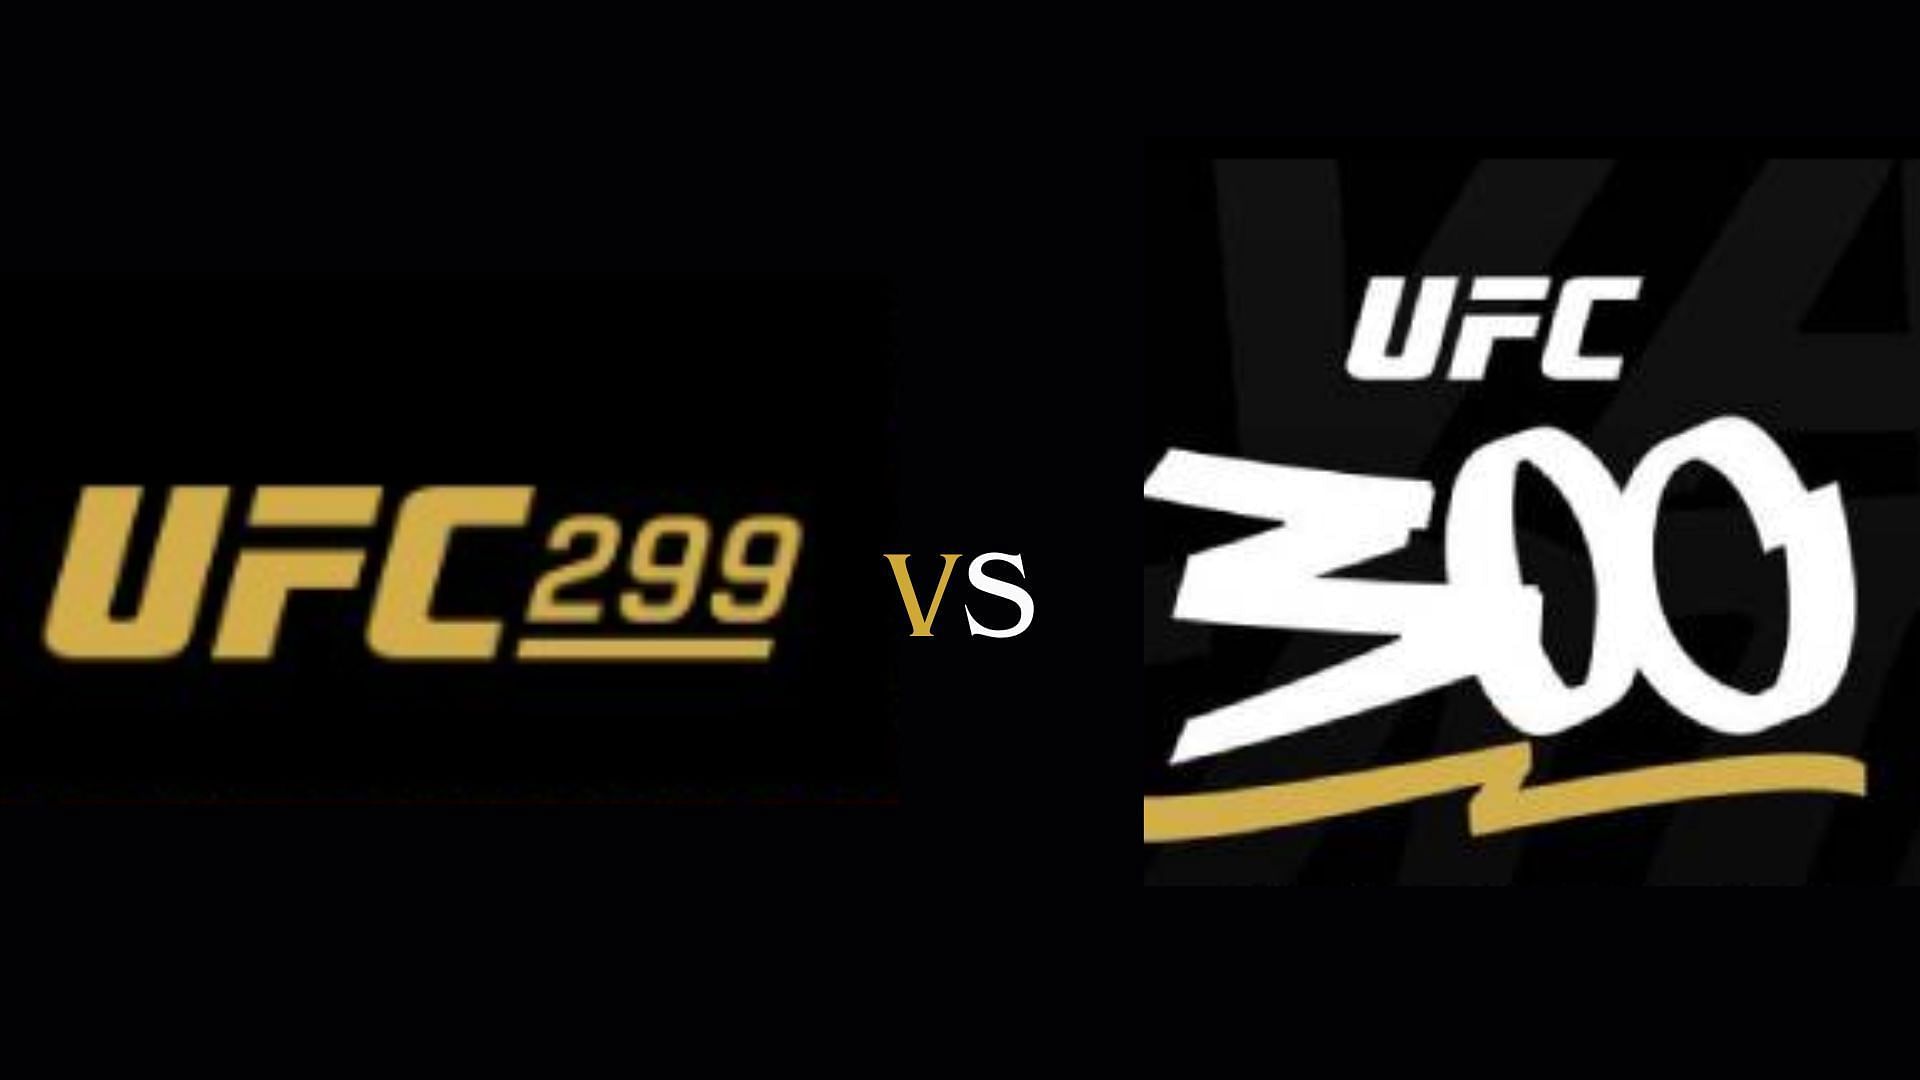 UFC 299 vs UFC 300 Comparing two of the most highlyanticipated cards